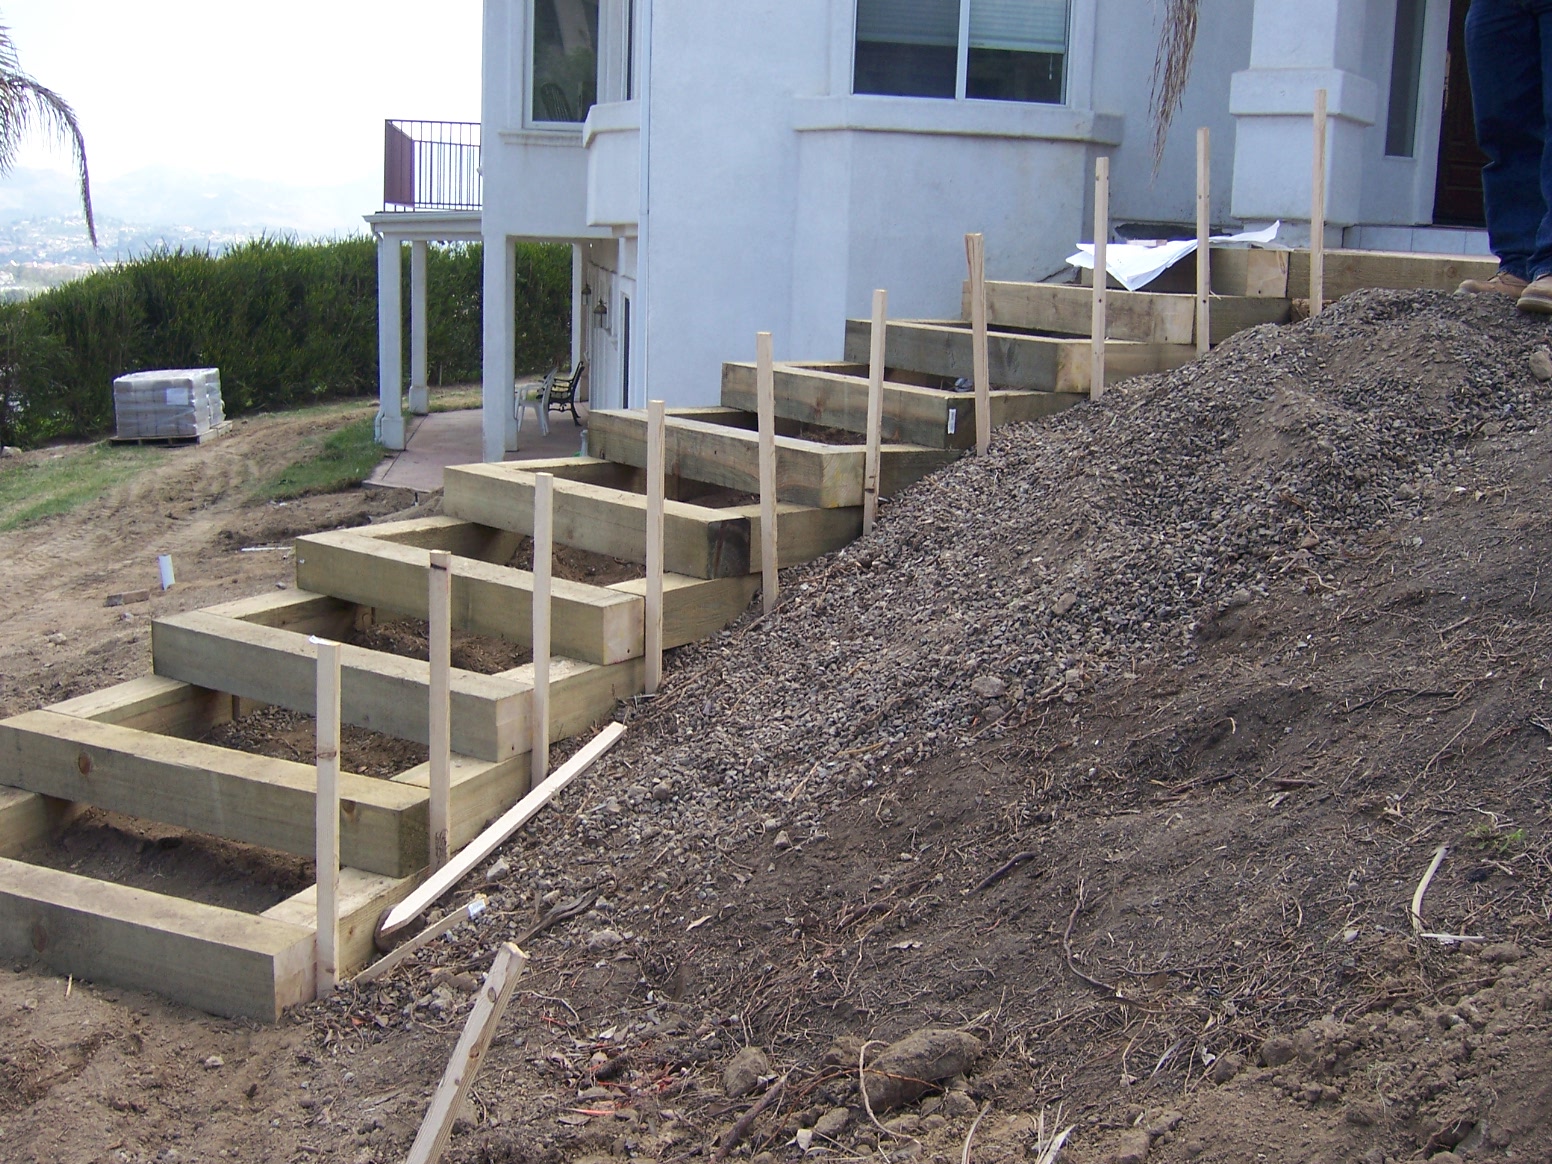 Woodworking build wood steps up a hill PDF Free Download